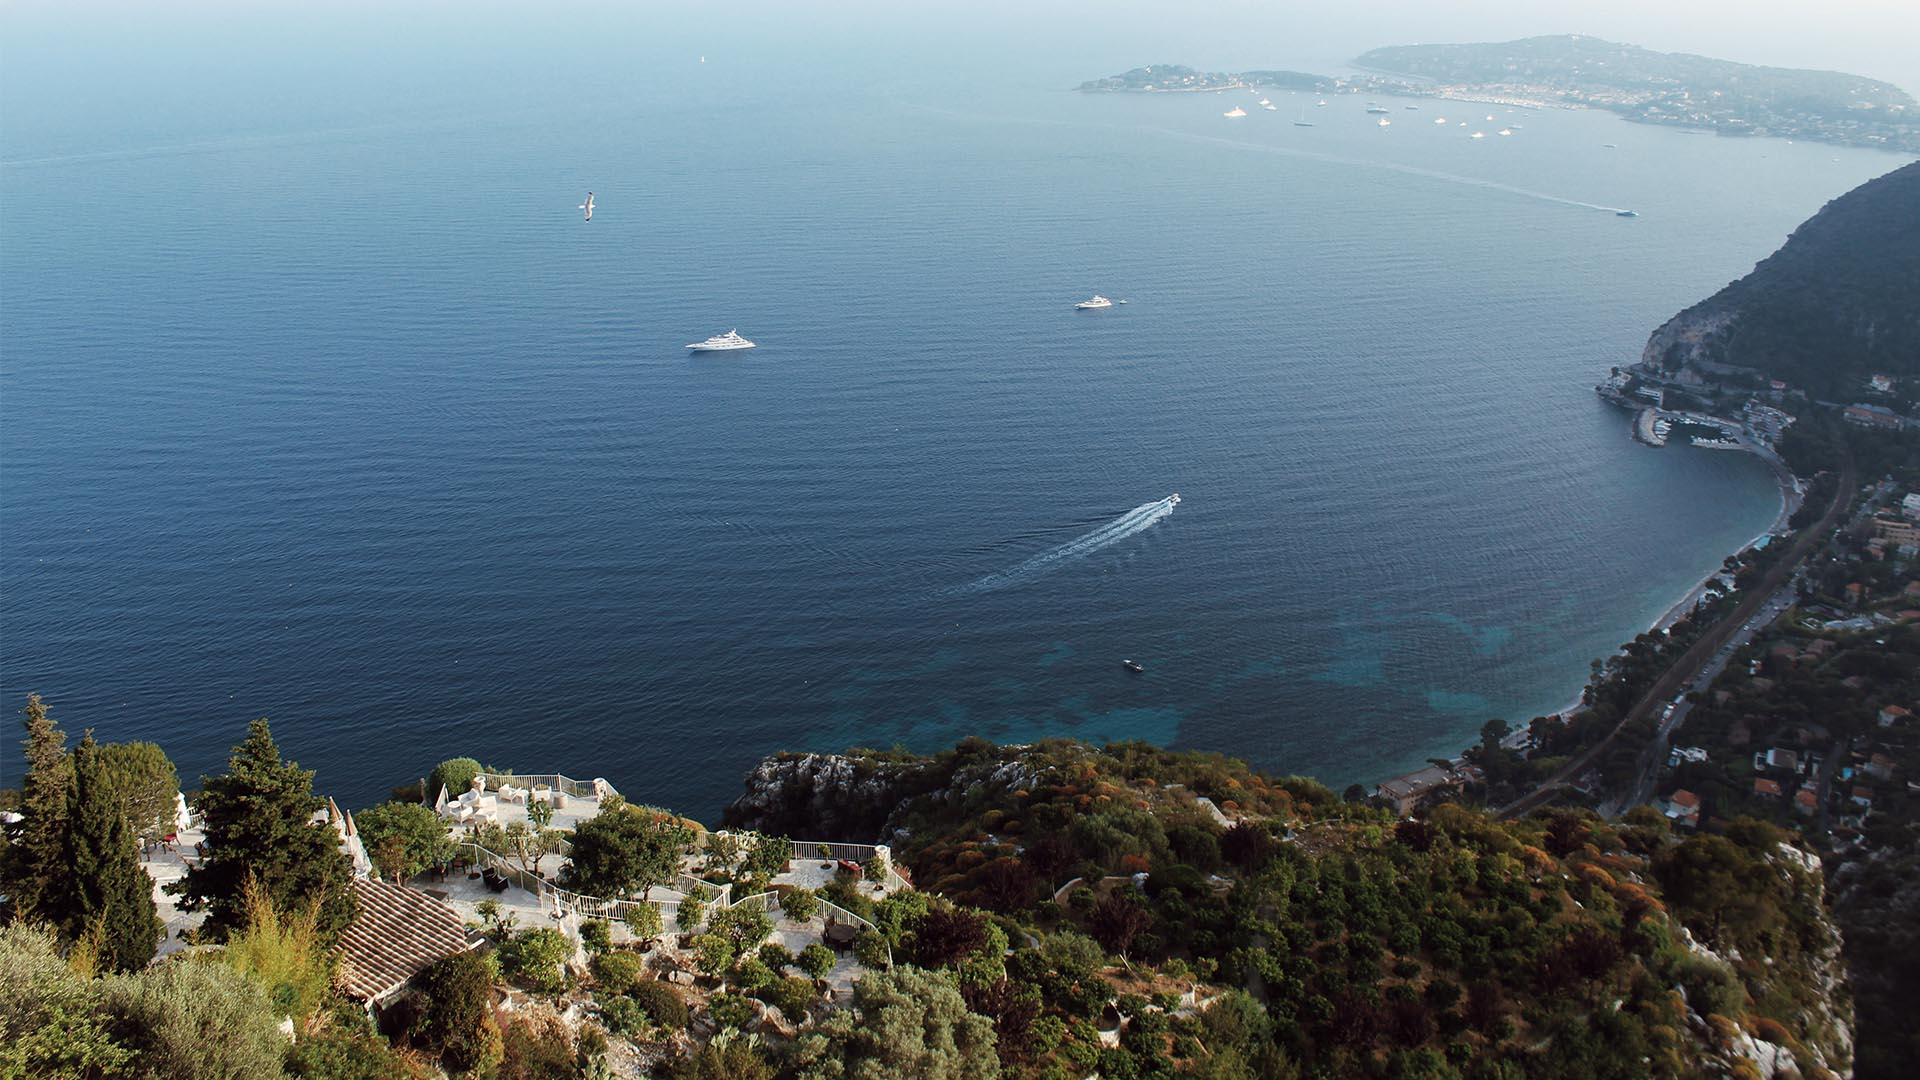 5 reasons to fall in love with the Côte d’Azur